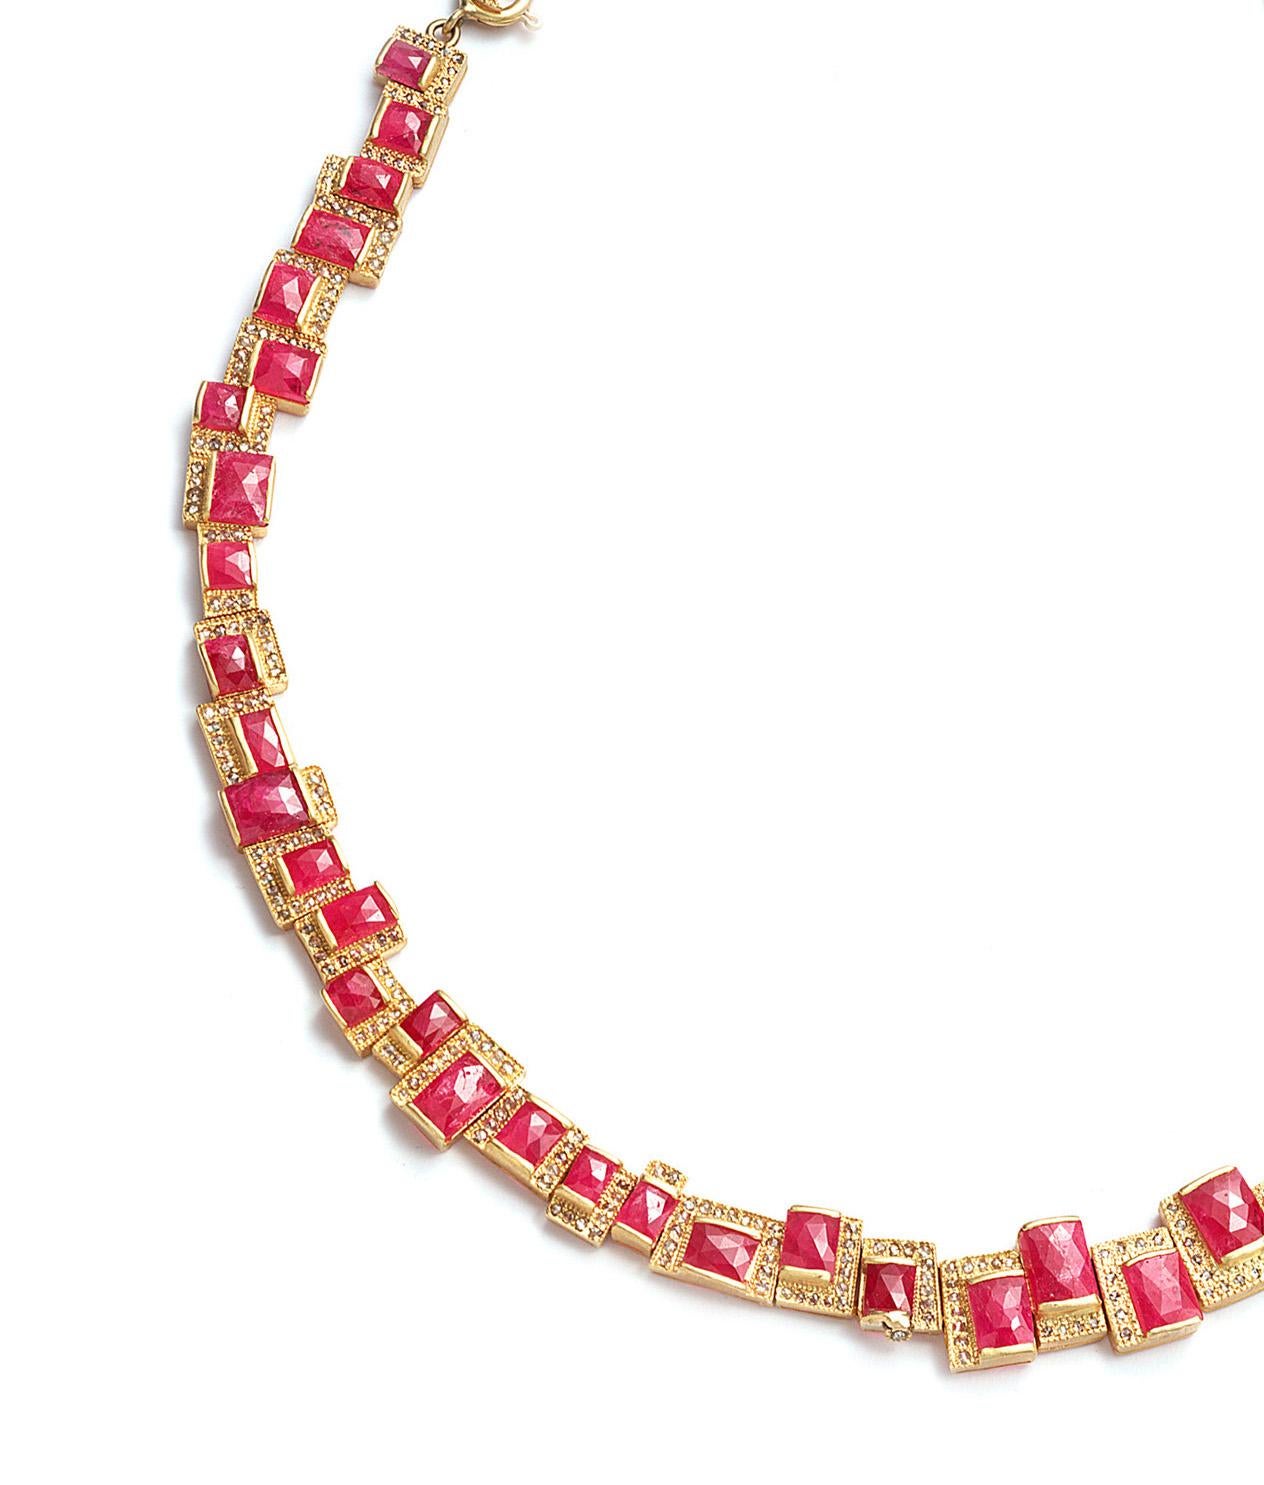 Stunning and remarkable necklace Art Deco Style and Mosaic from Coomi inspire her. Crafted in rich 20 Karat Yellow Gold with Mozambic Ruby weighing approximately 51.55cts and Diamonds 3.04cts, brought to you from the Luminosity collection, which